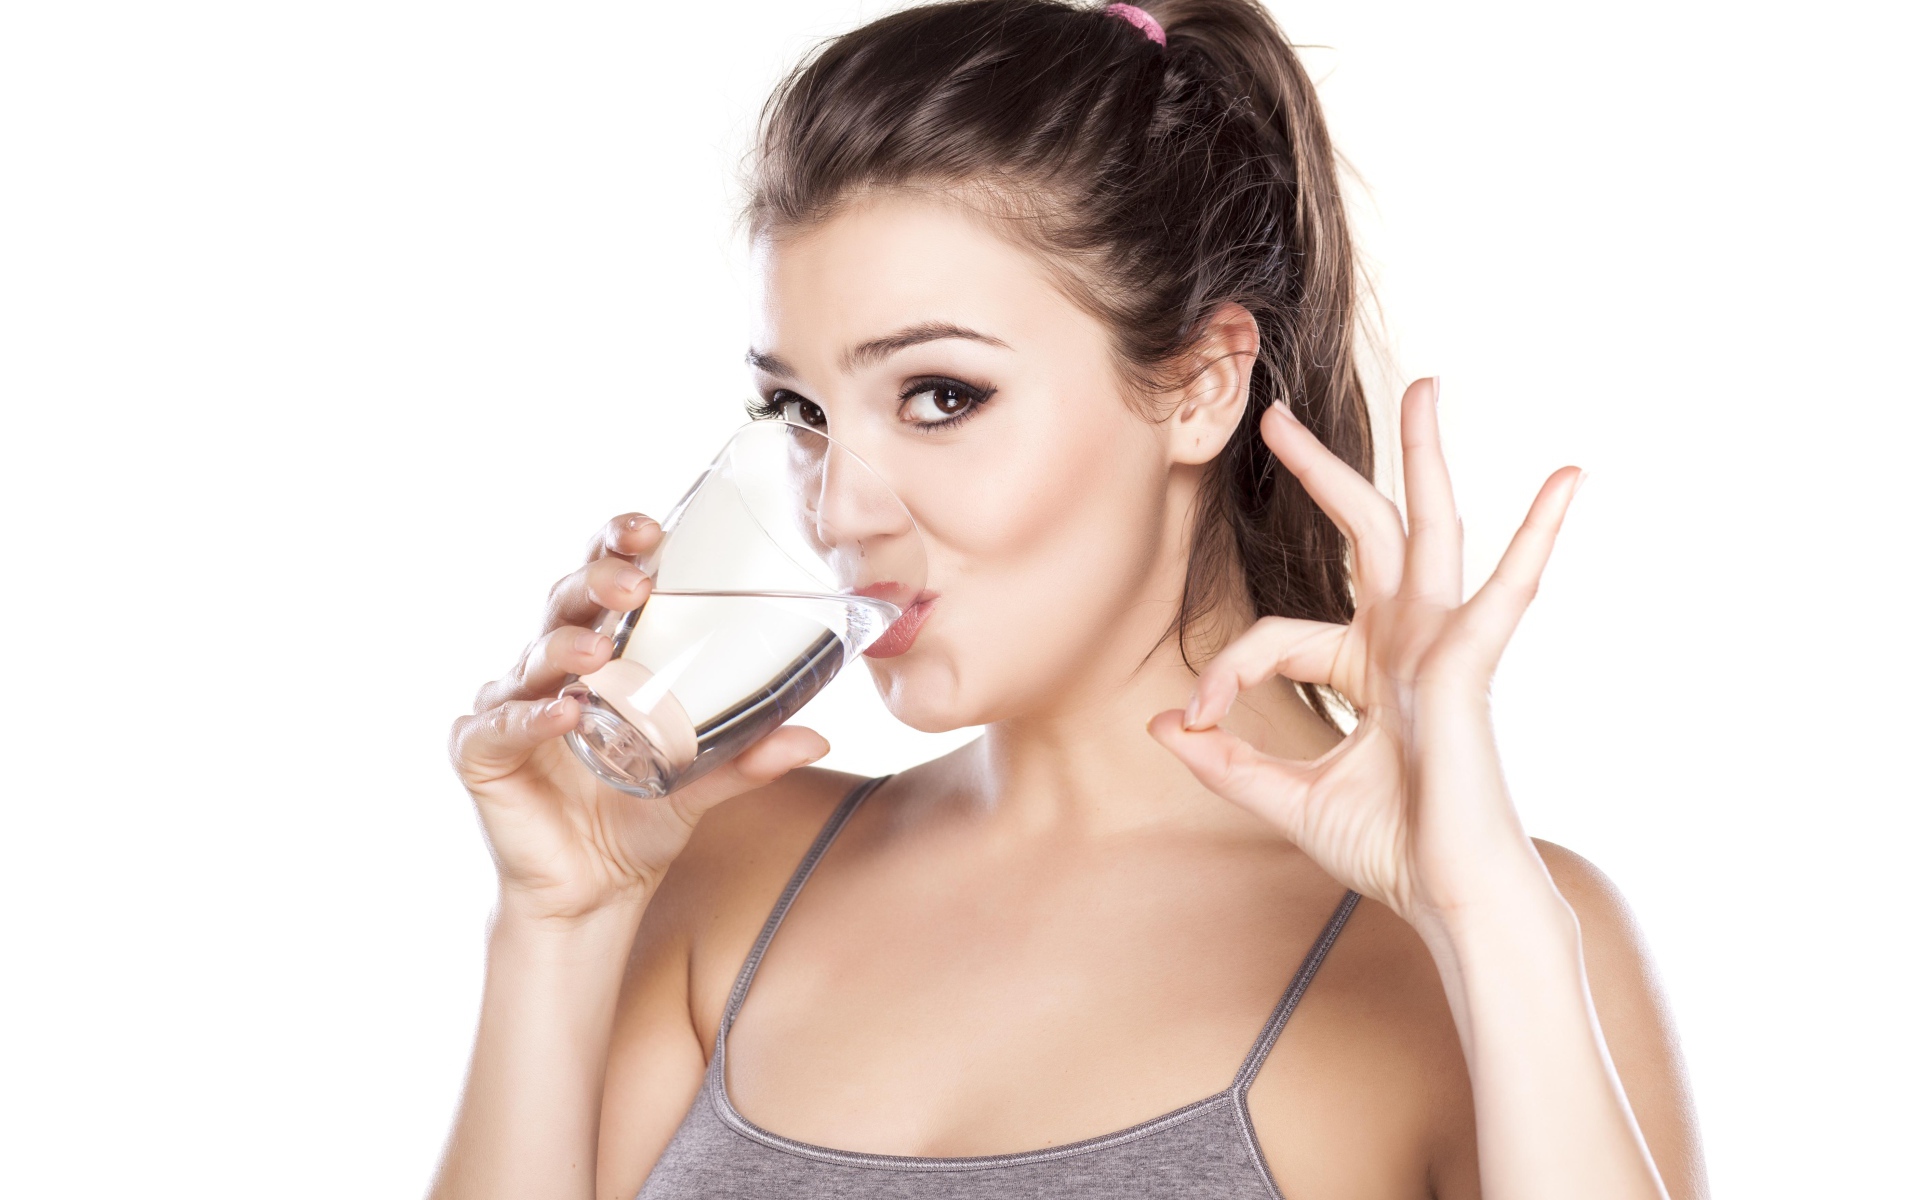 Young athletic girl drinks water from a glass